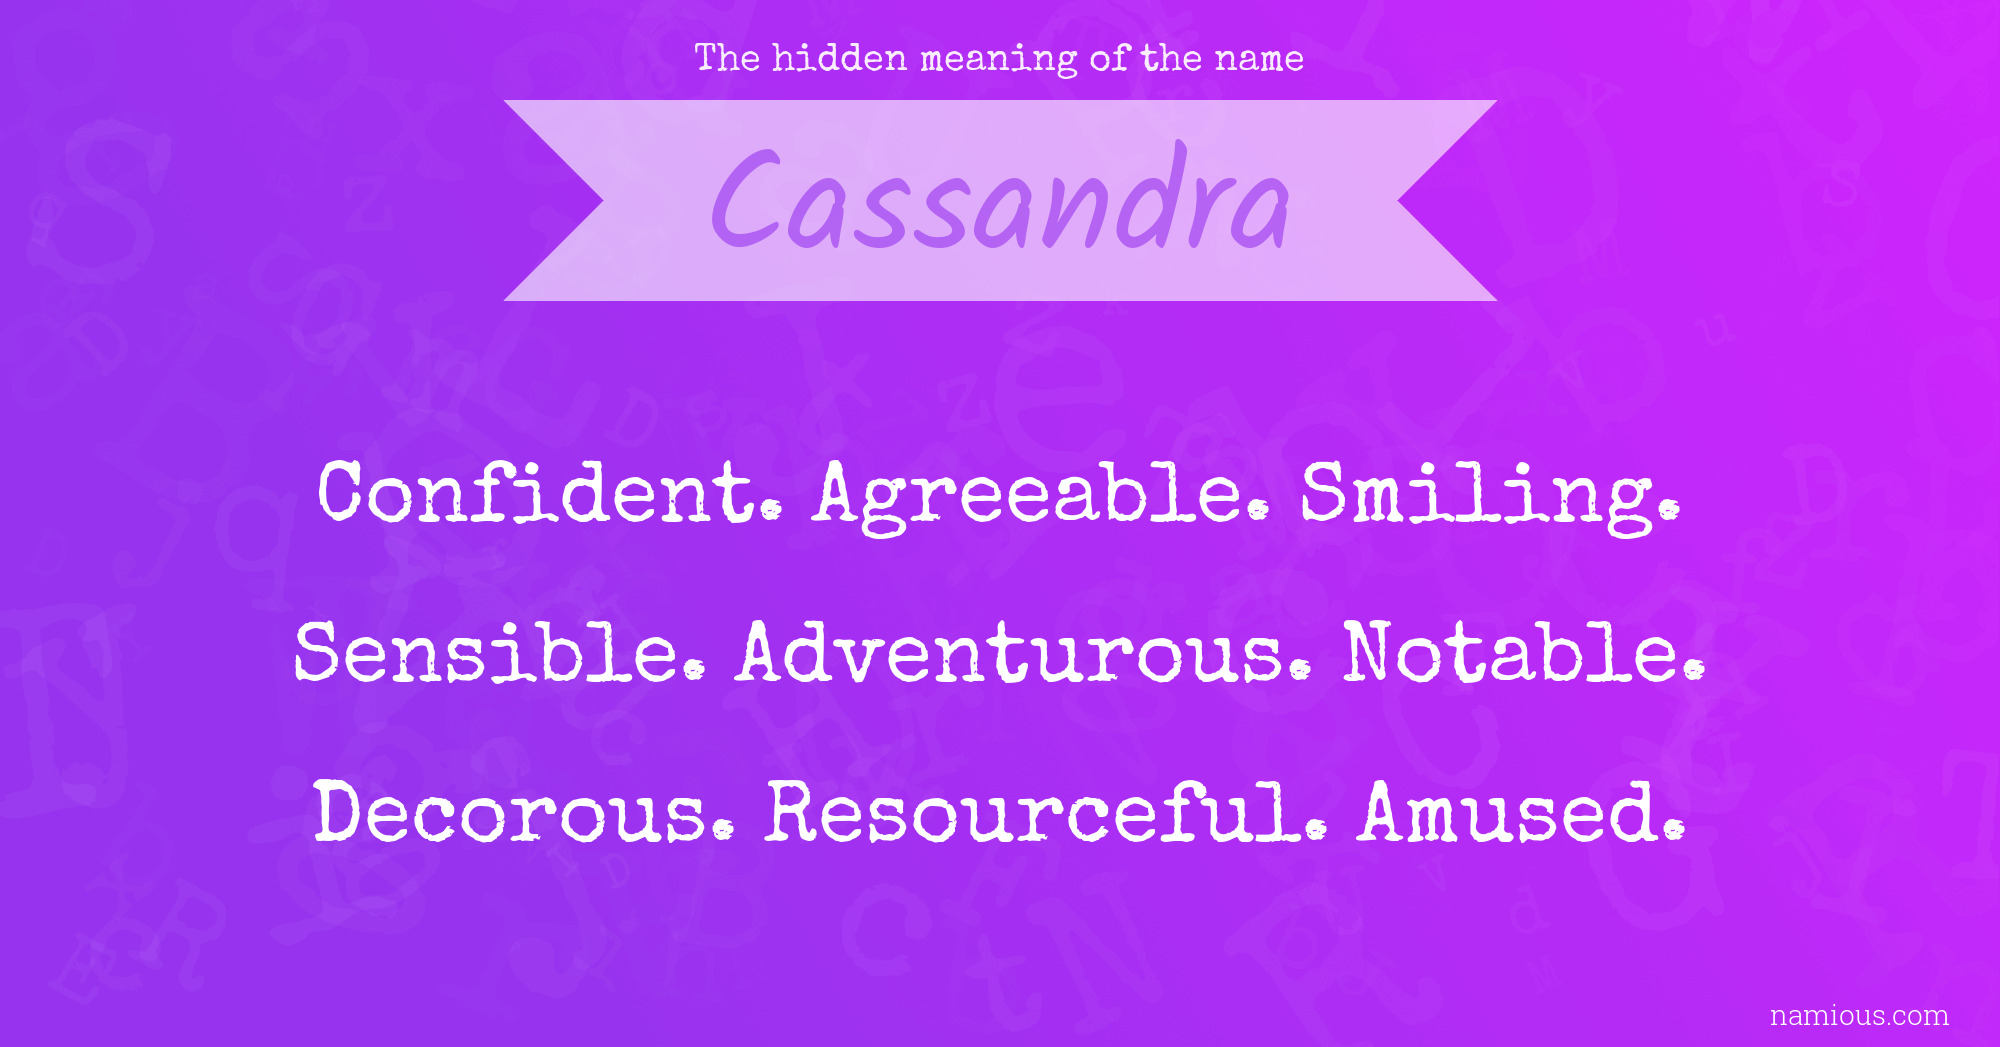 The hidden meaning of the name Cassandra